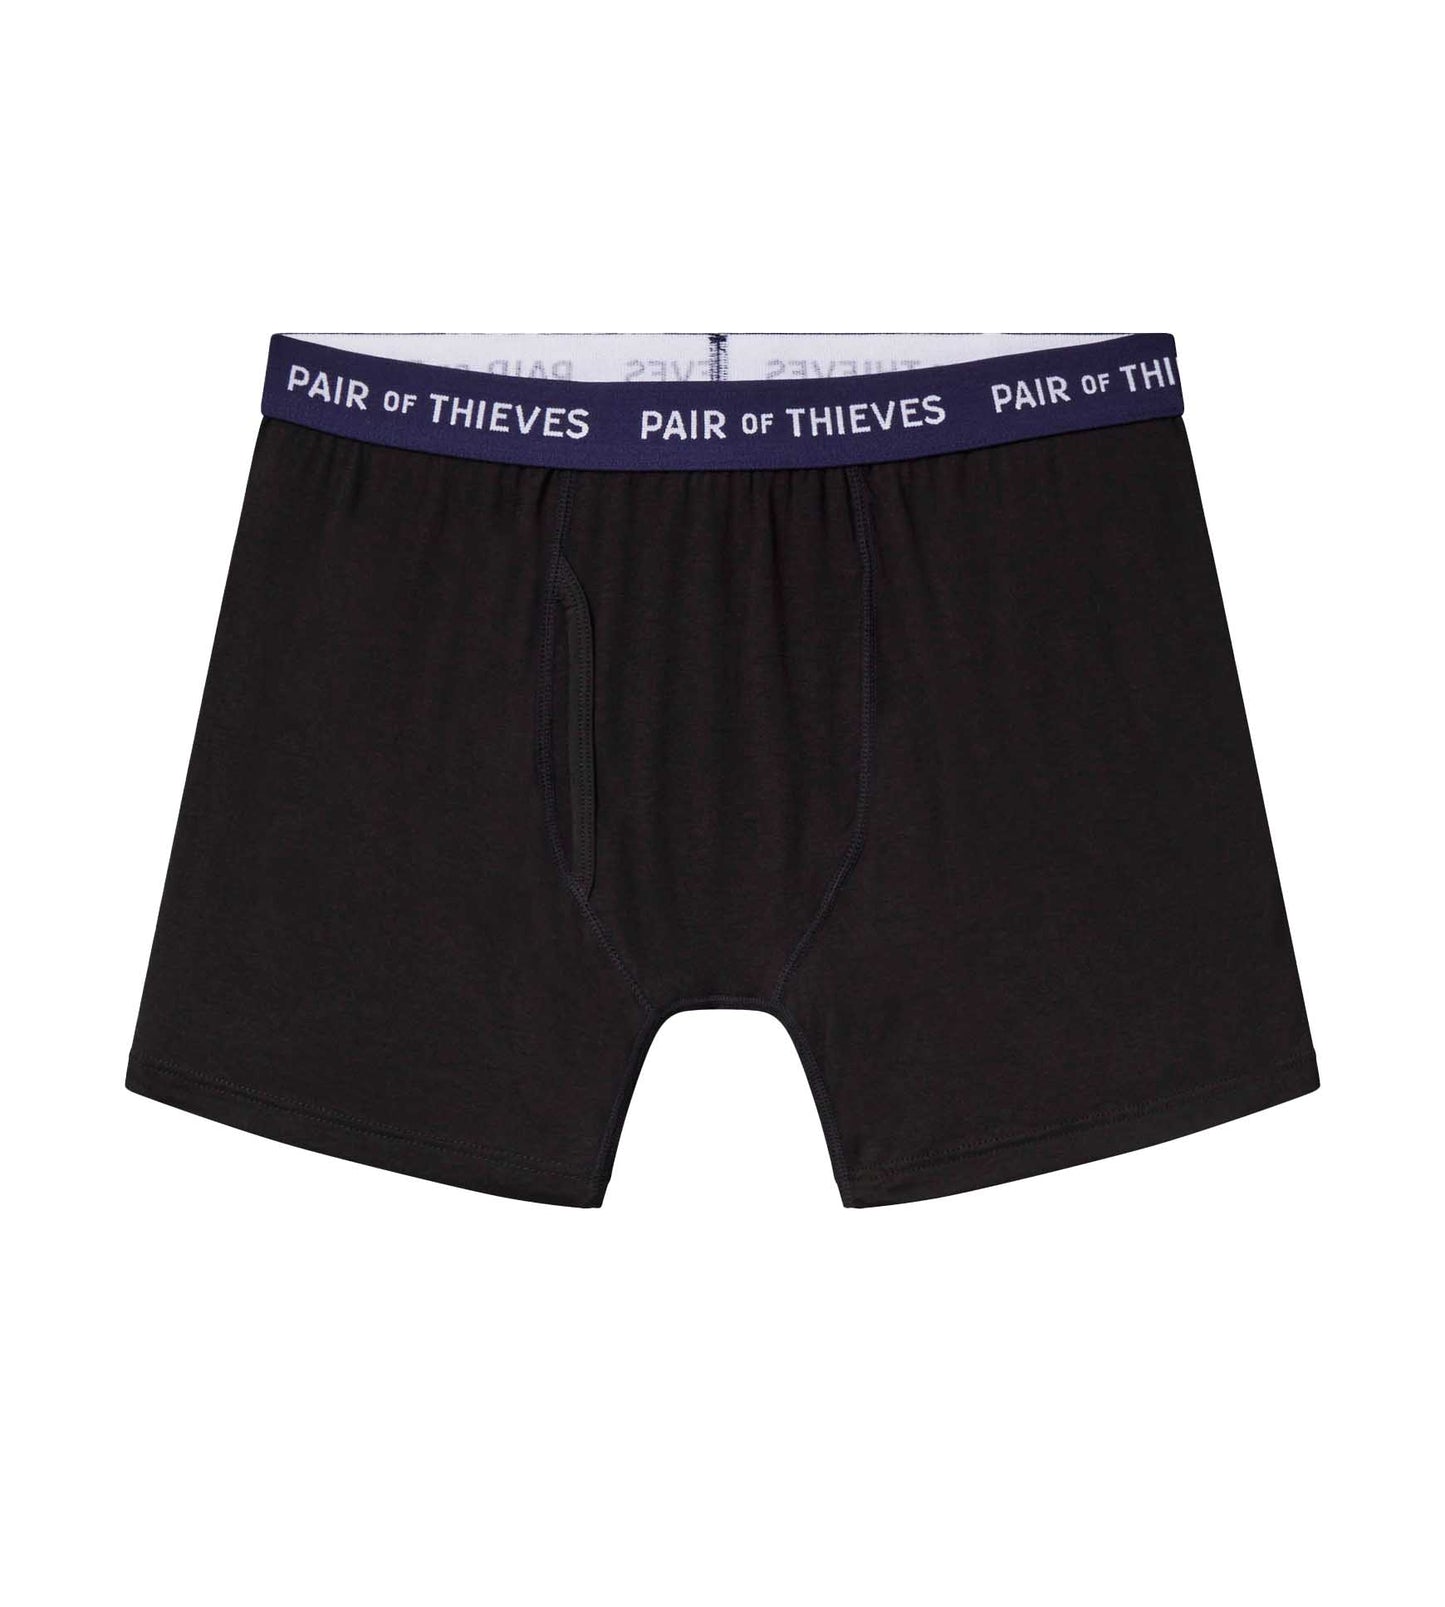 supersoft black boxer brief, black with white logo on gray waistband